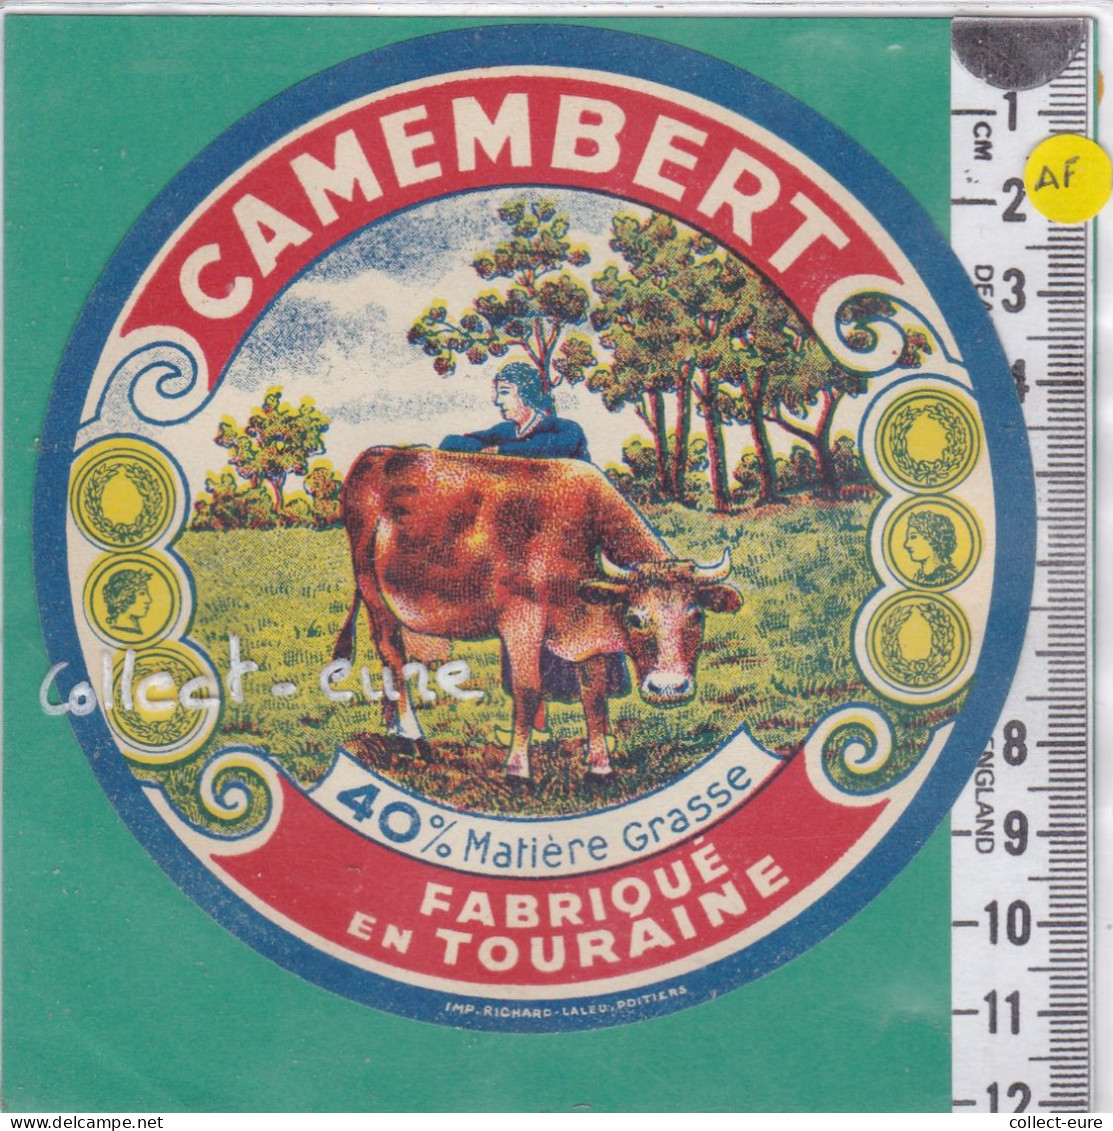 C1361 FROMAGE CAMEMBERT TOURAINE 40 % - Fromage